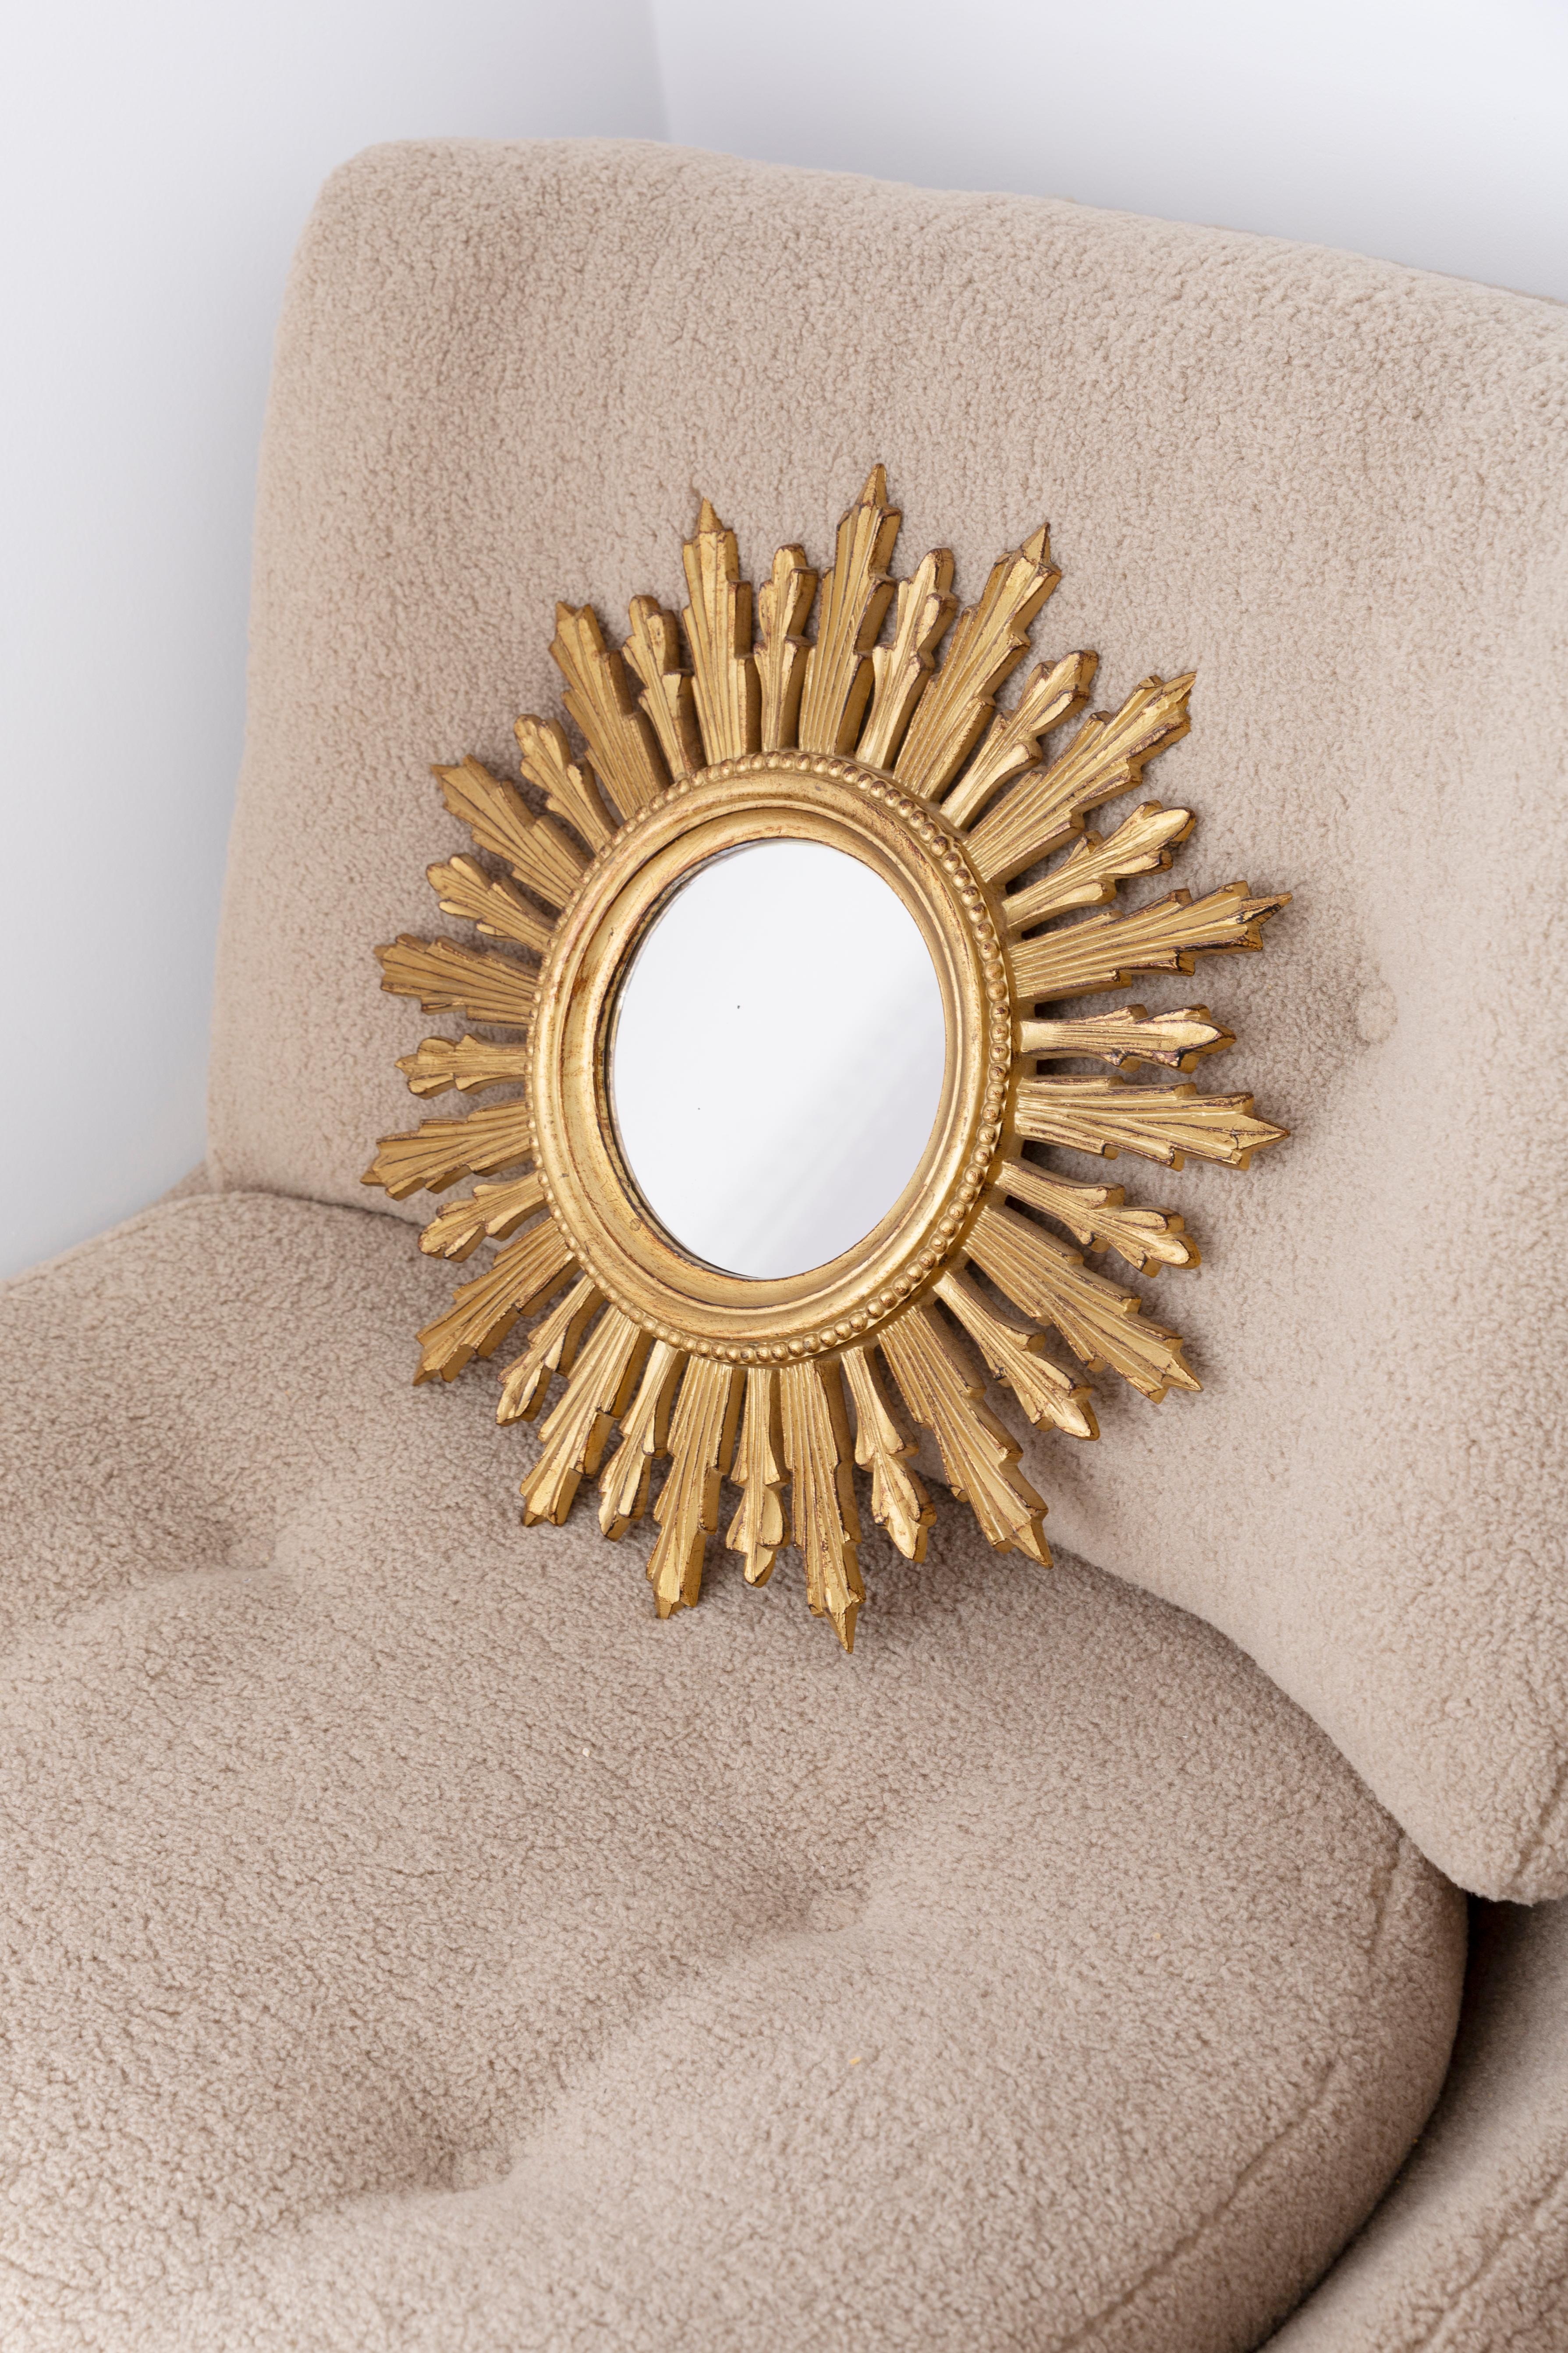 A mirror in a golden decorative sun-shaped frame from Italy. The frame is made of plastic and wood. Very good condition, no damage or cracks in the frame, the mirror pane has minimal flaws. Beautiful piece for every interior! Signed 